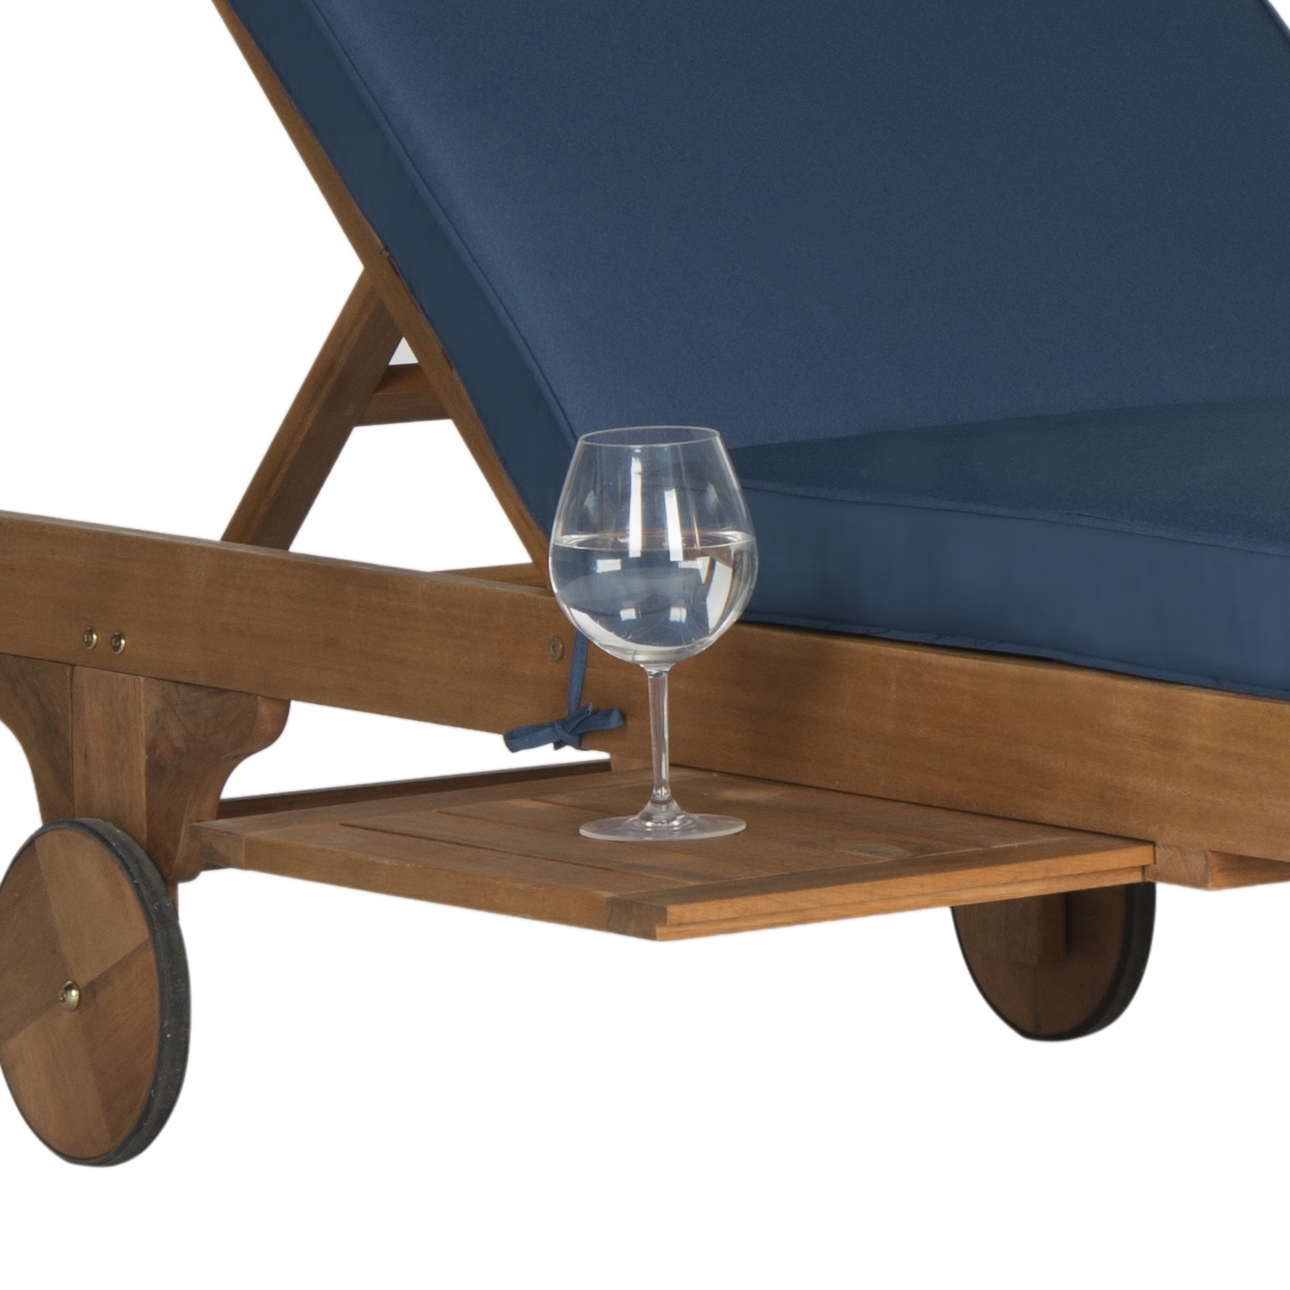 Newport Chaise Lounge Chair With Side Table - Natural/Navy - Safavieh - Image 4